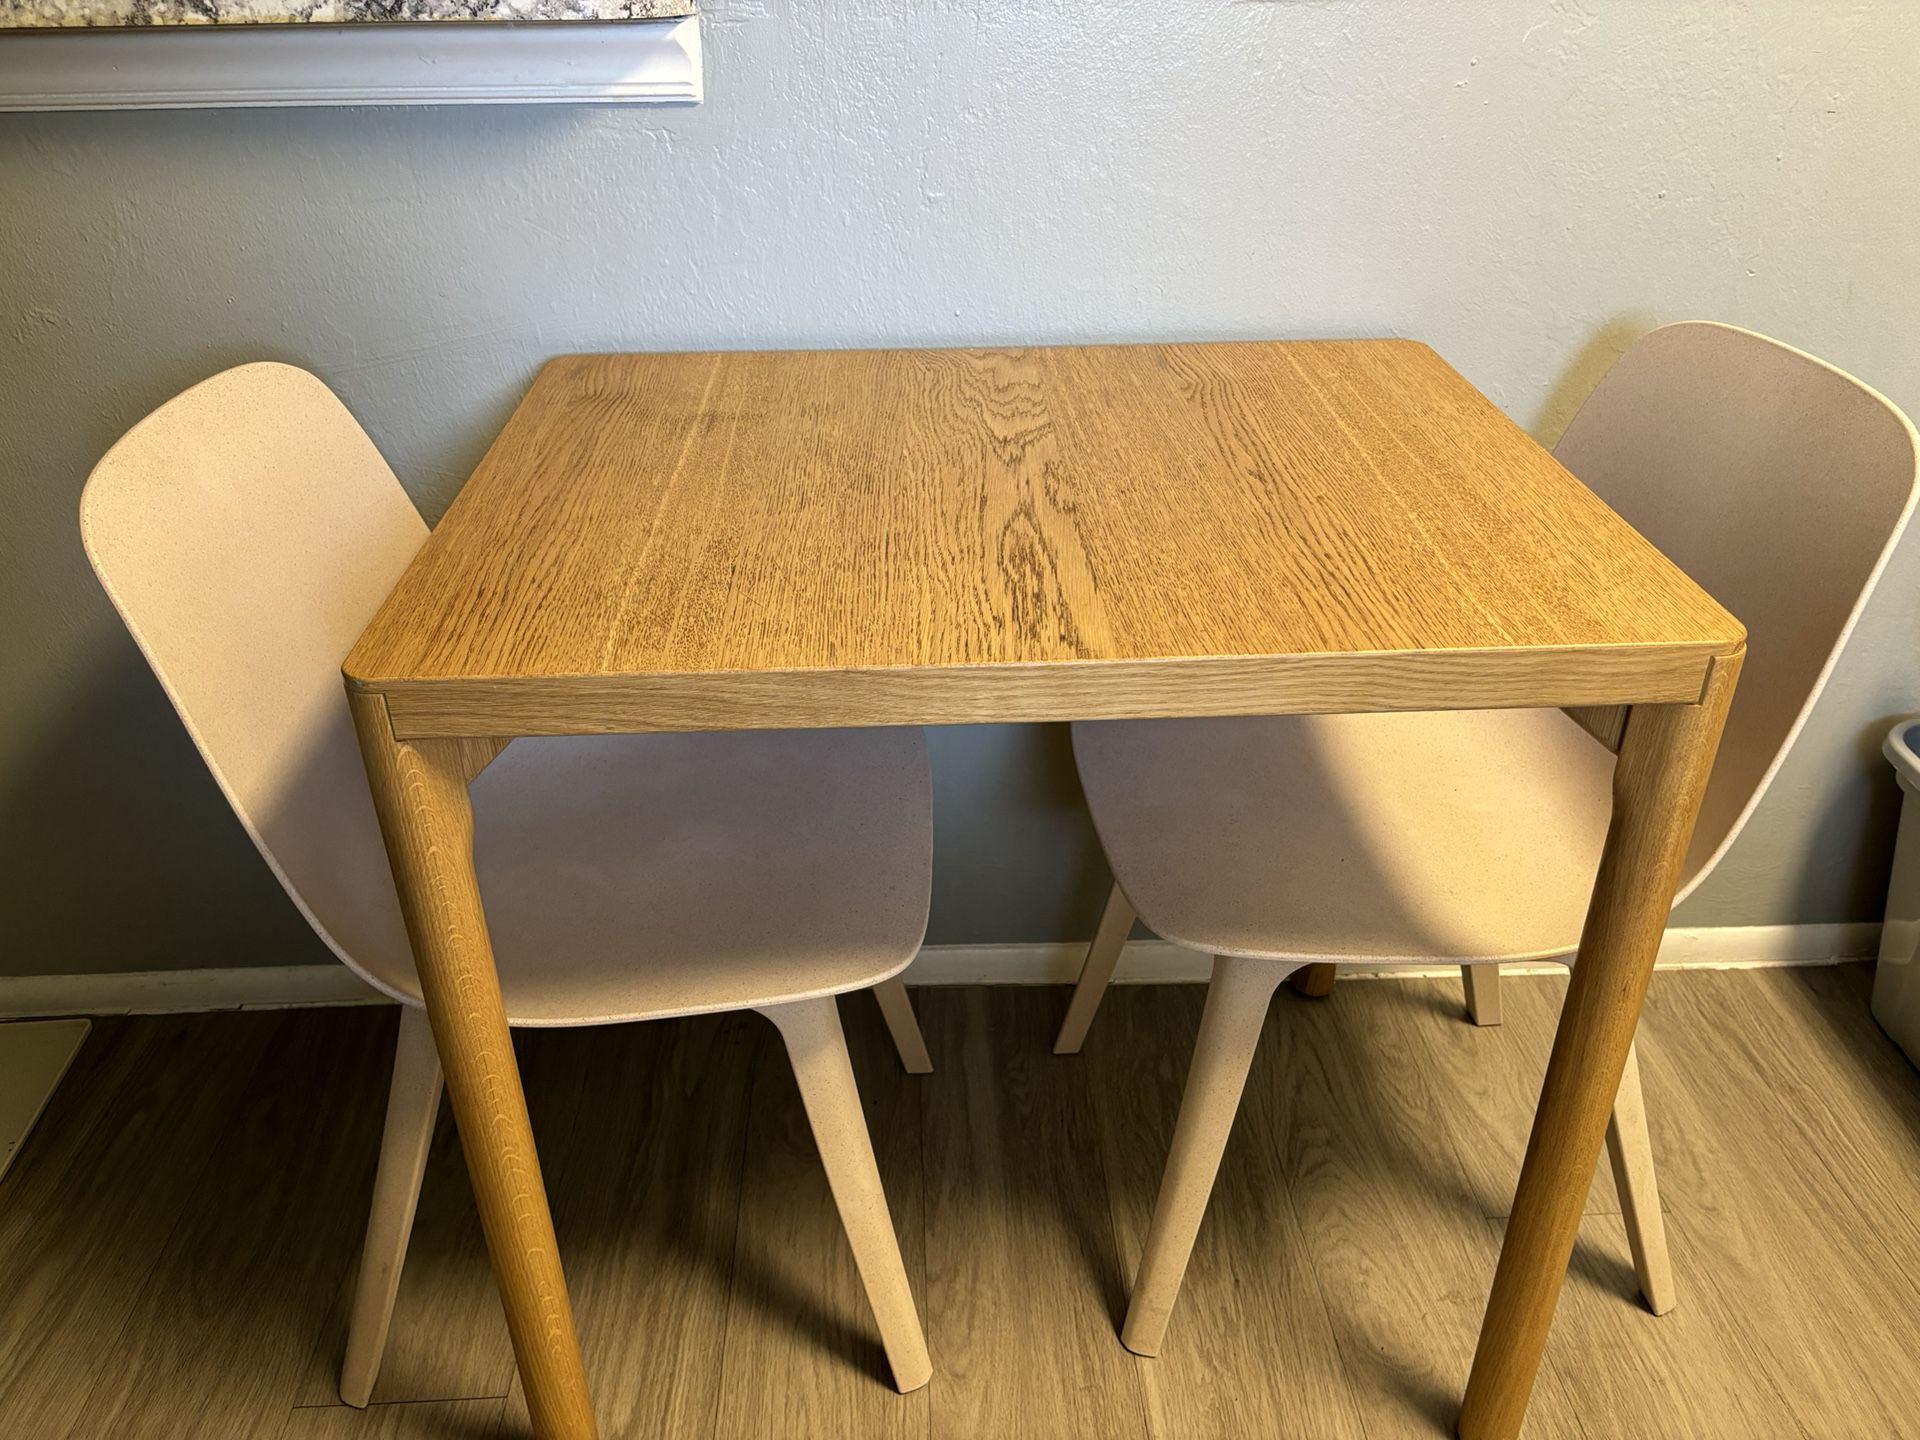 IKEA Table And Two Chairs 